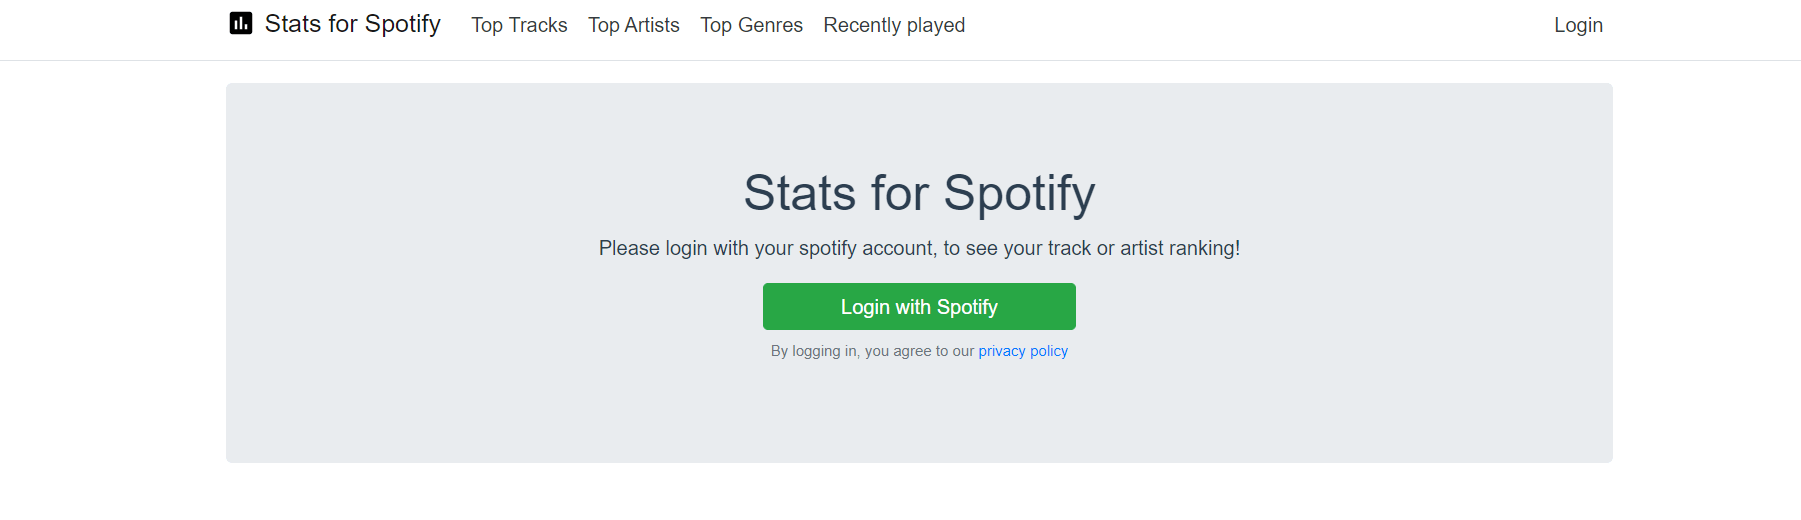 Stats for Spotify Image